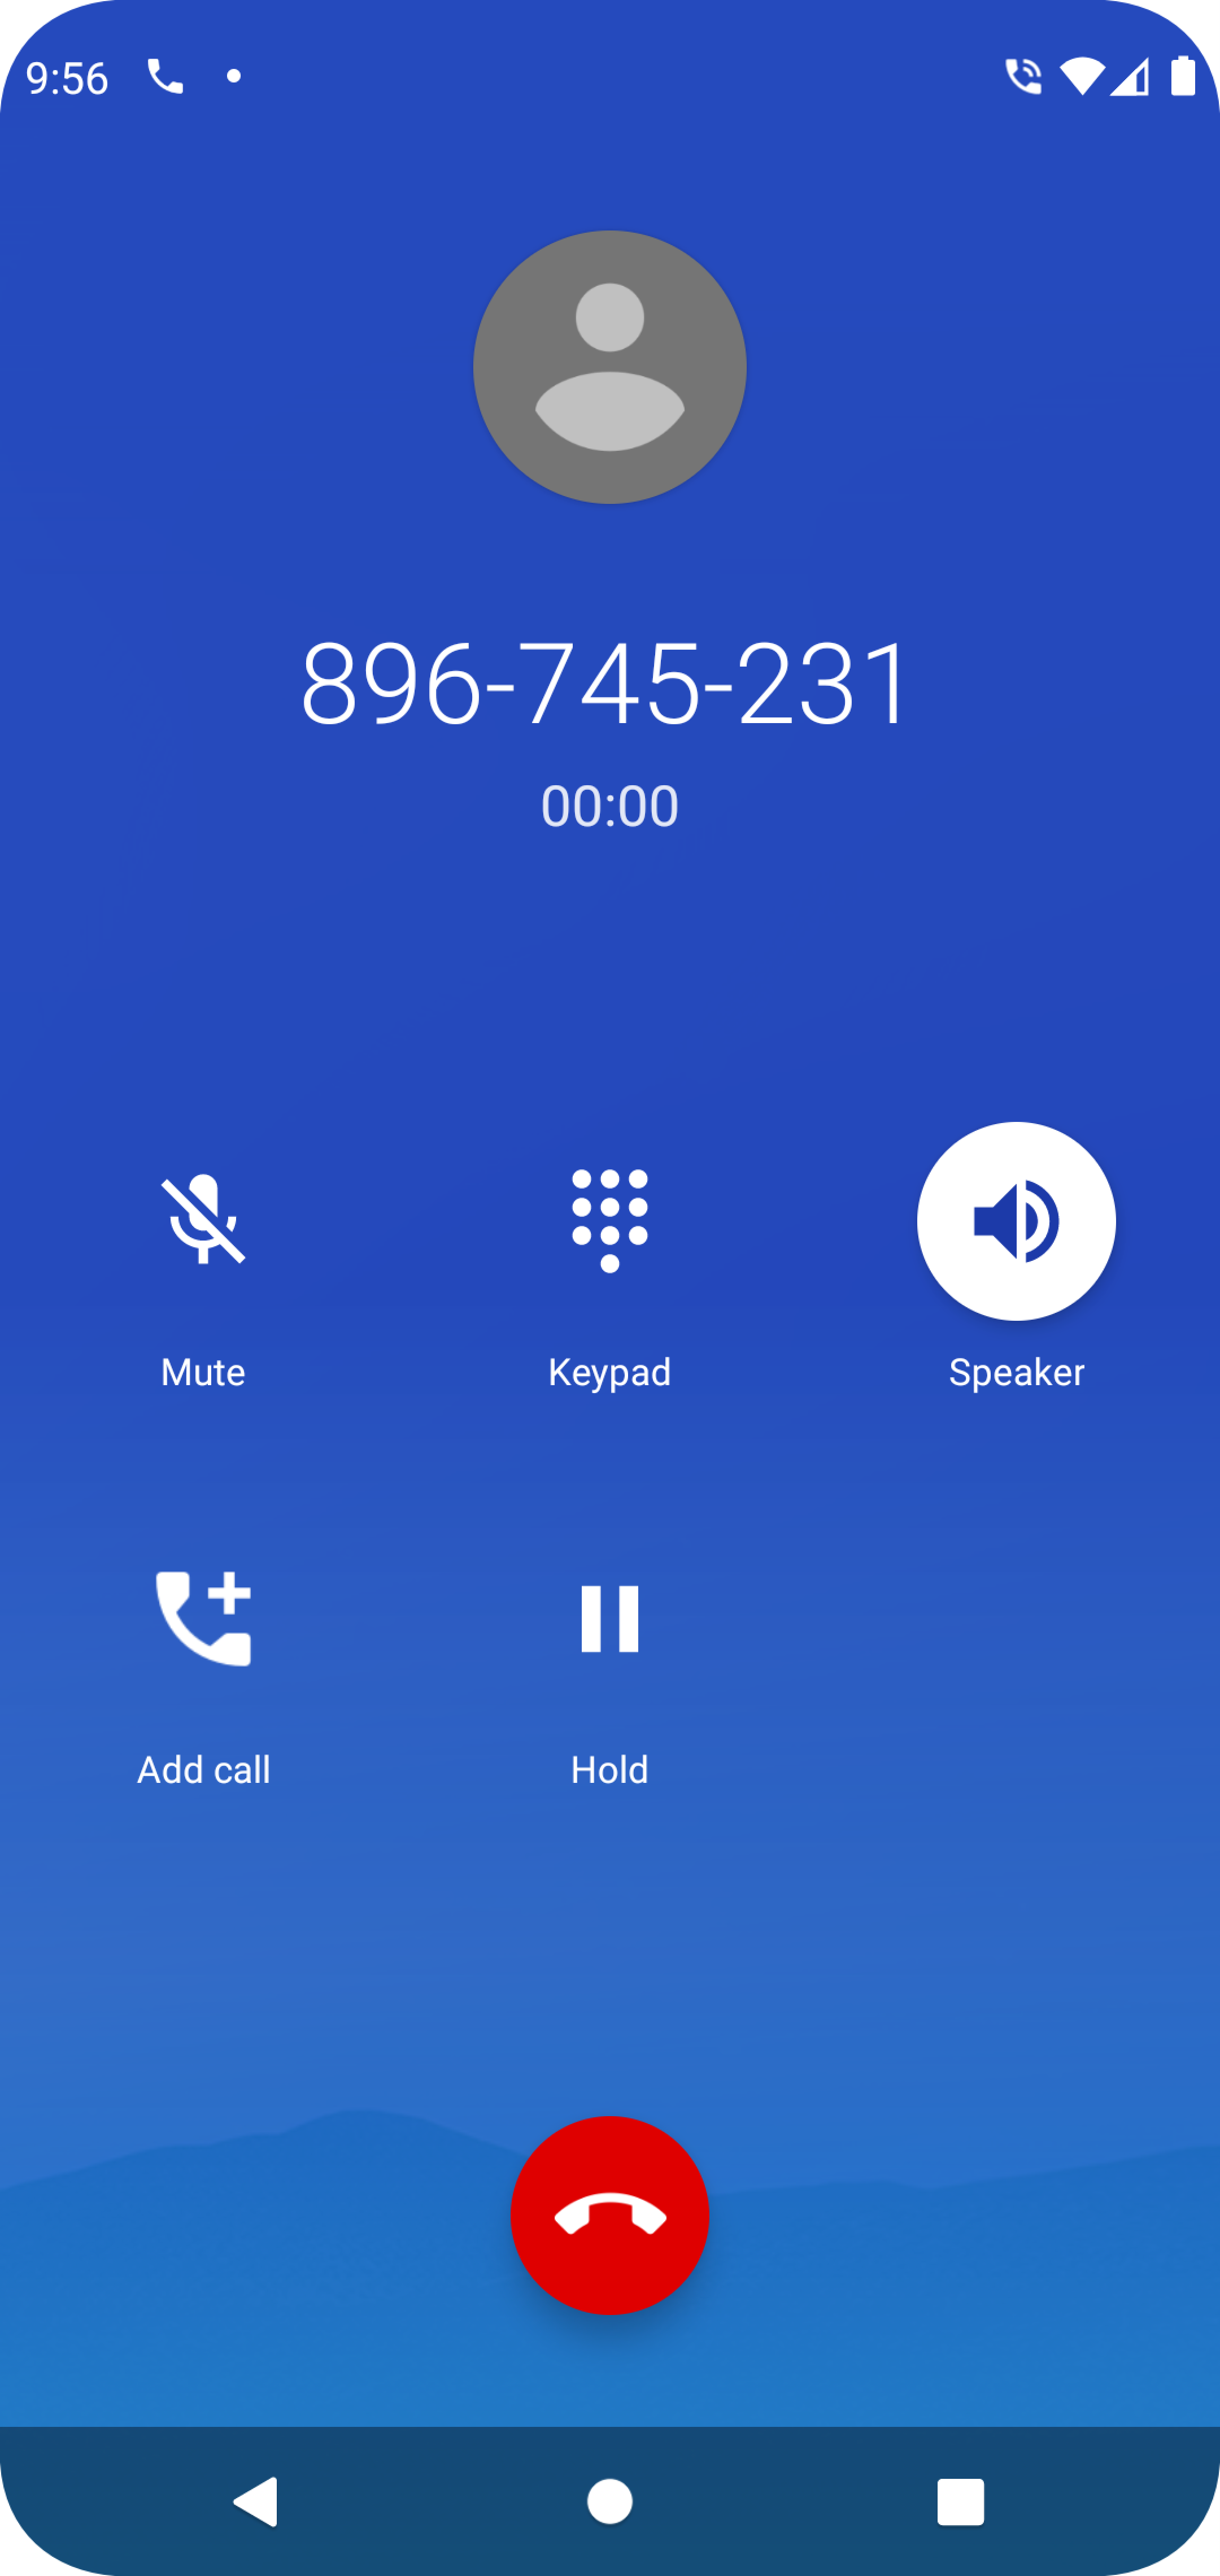 After user tapped on call number